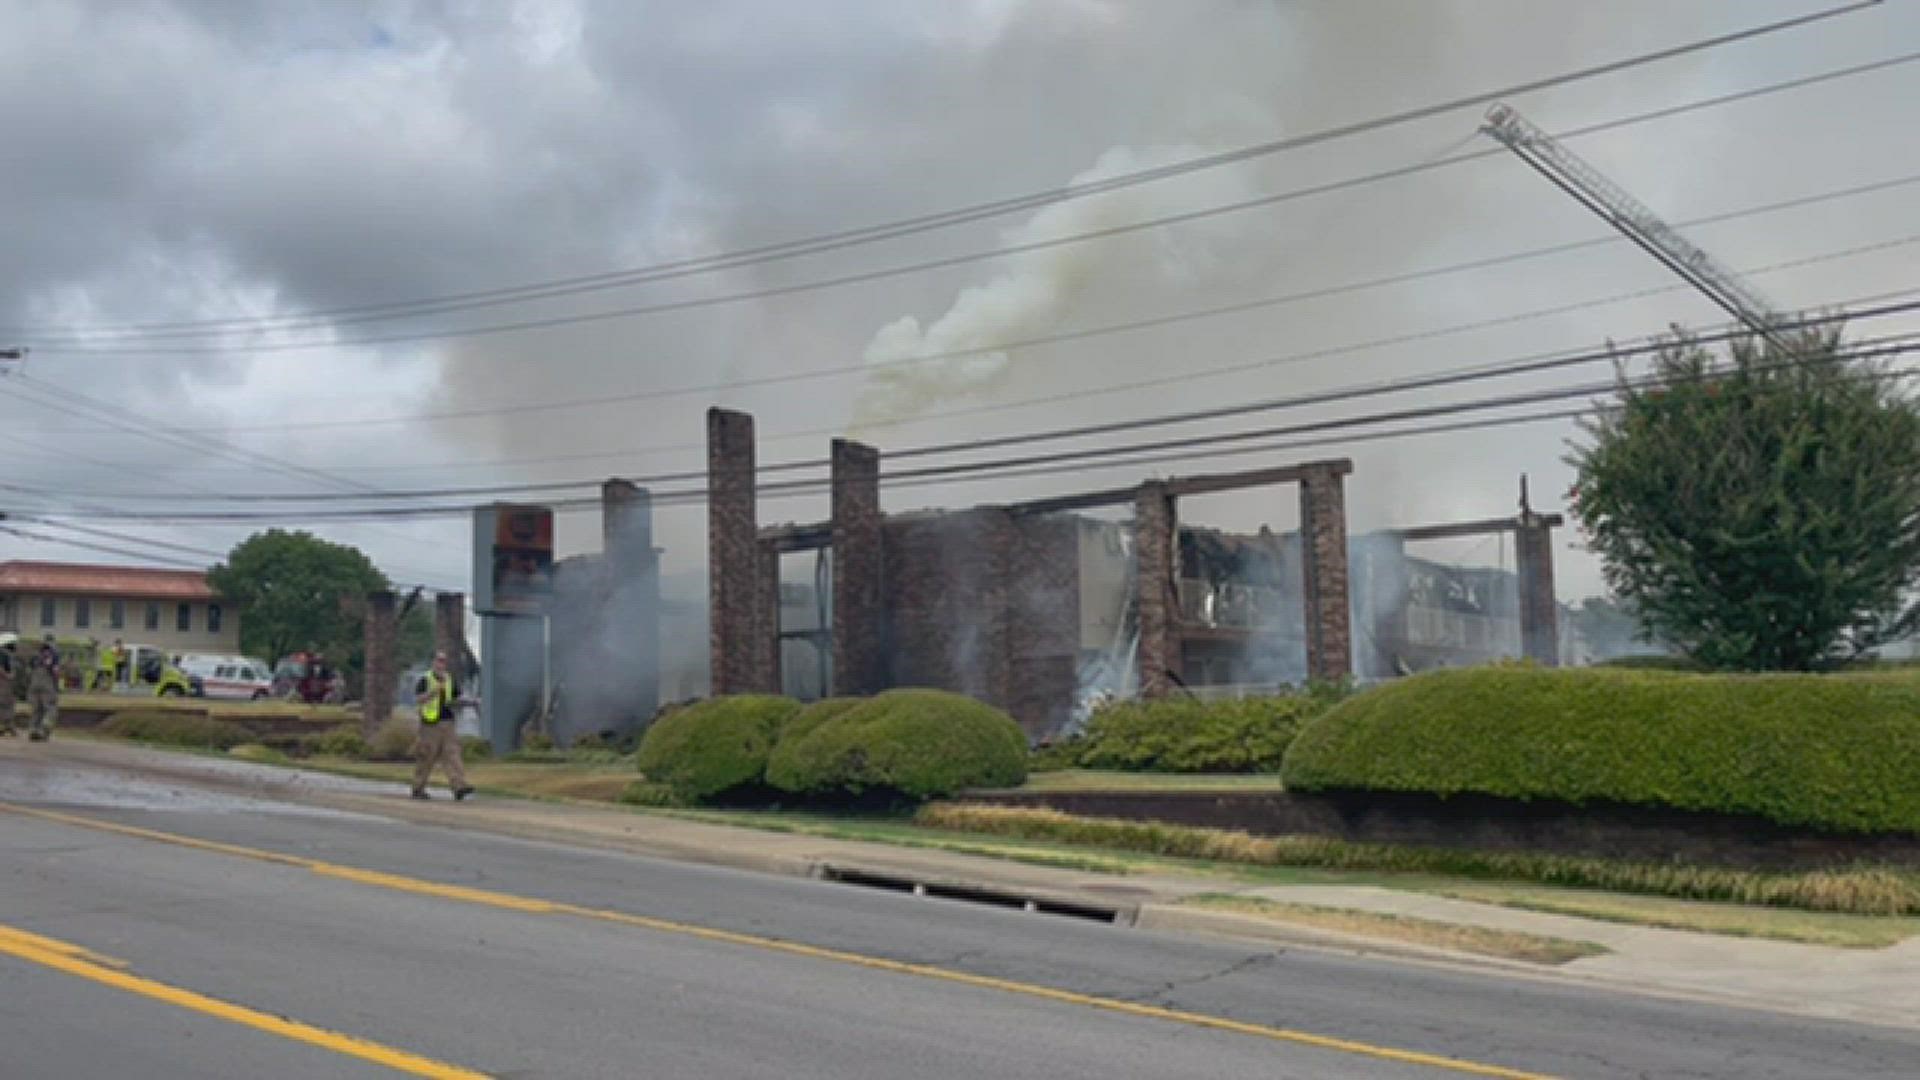 The Clarksville Police Department battles a fire at the Best Western Motel on July 29, 2022.